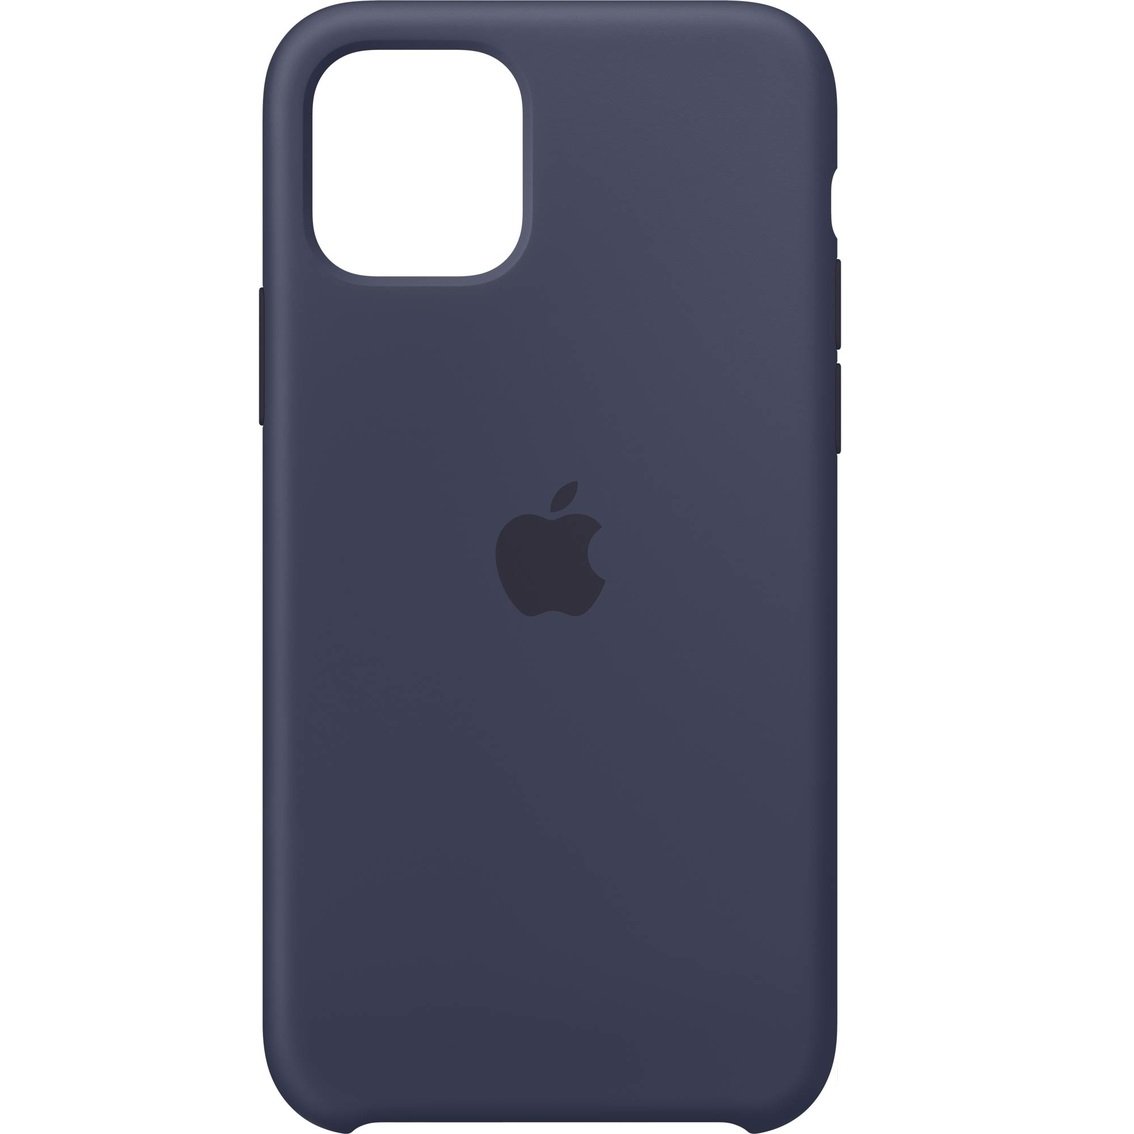 Silicon Case For iPhone 11 Pro Max - Midnight Blue - Mobilegadgets360